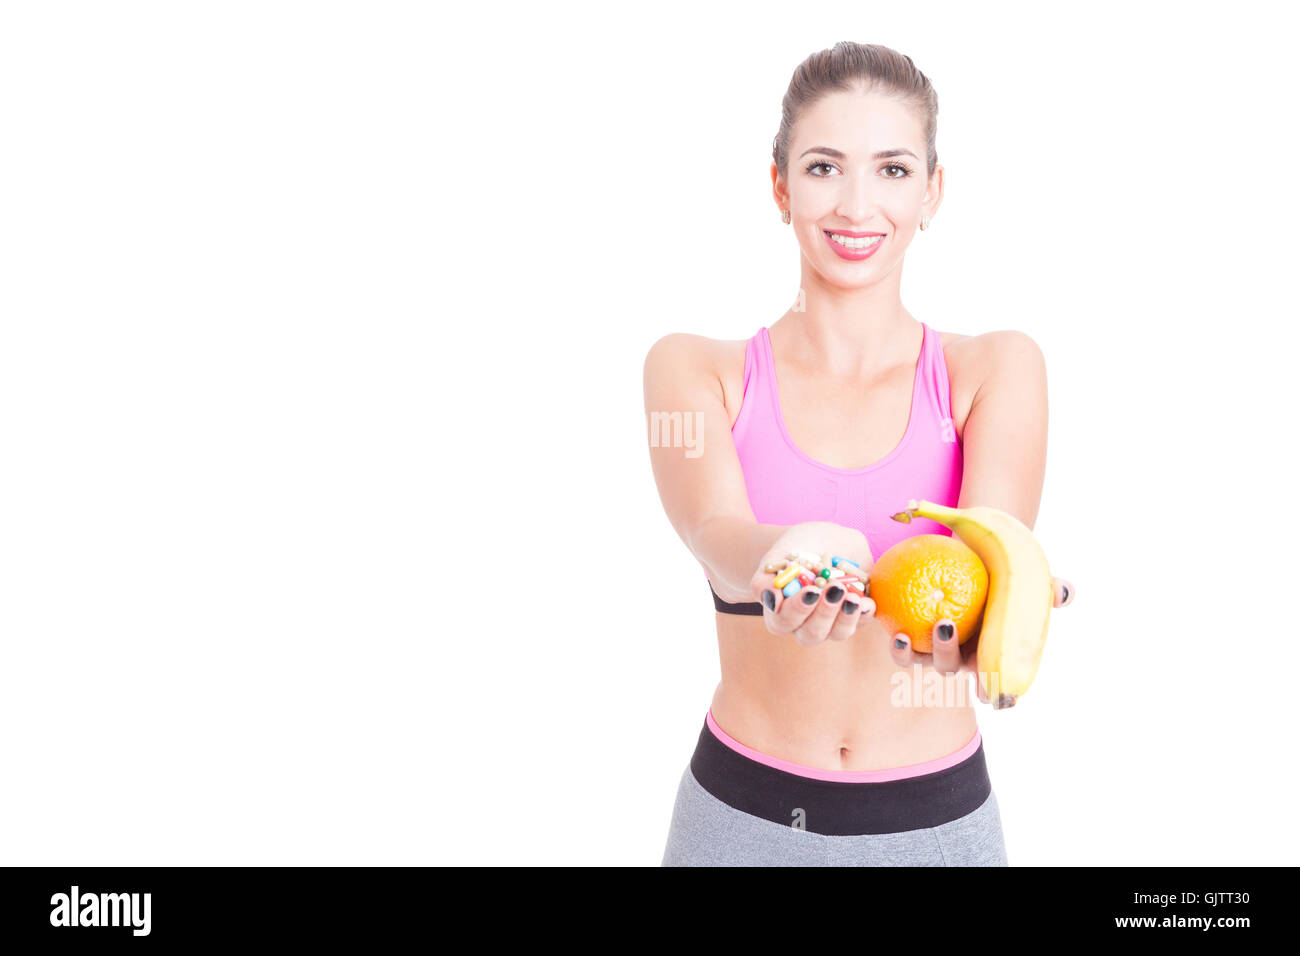 Girl wearing sportswear showing fruits and pills or supplements isolated on white background with copy text space Stock Photo